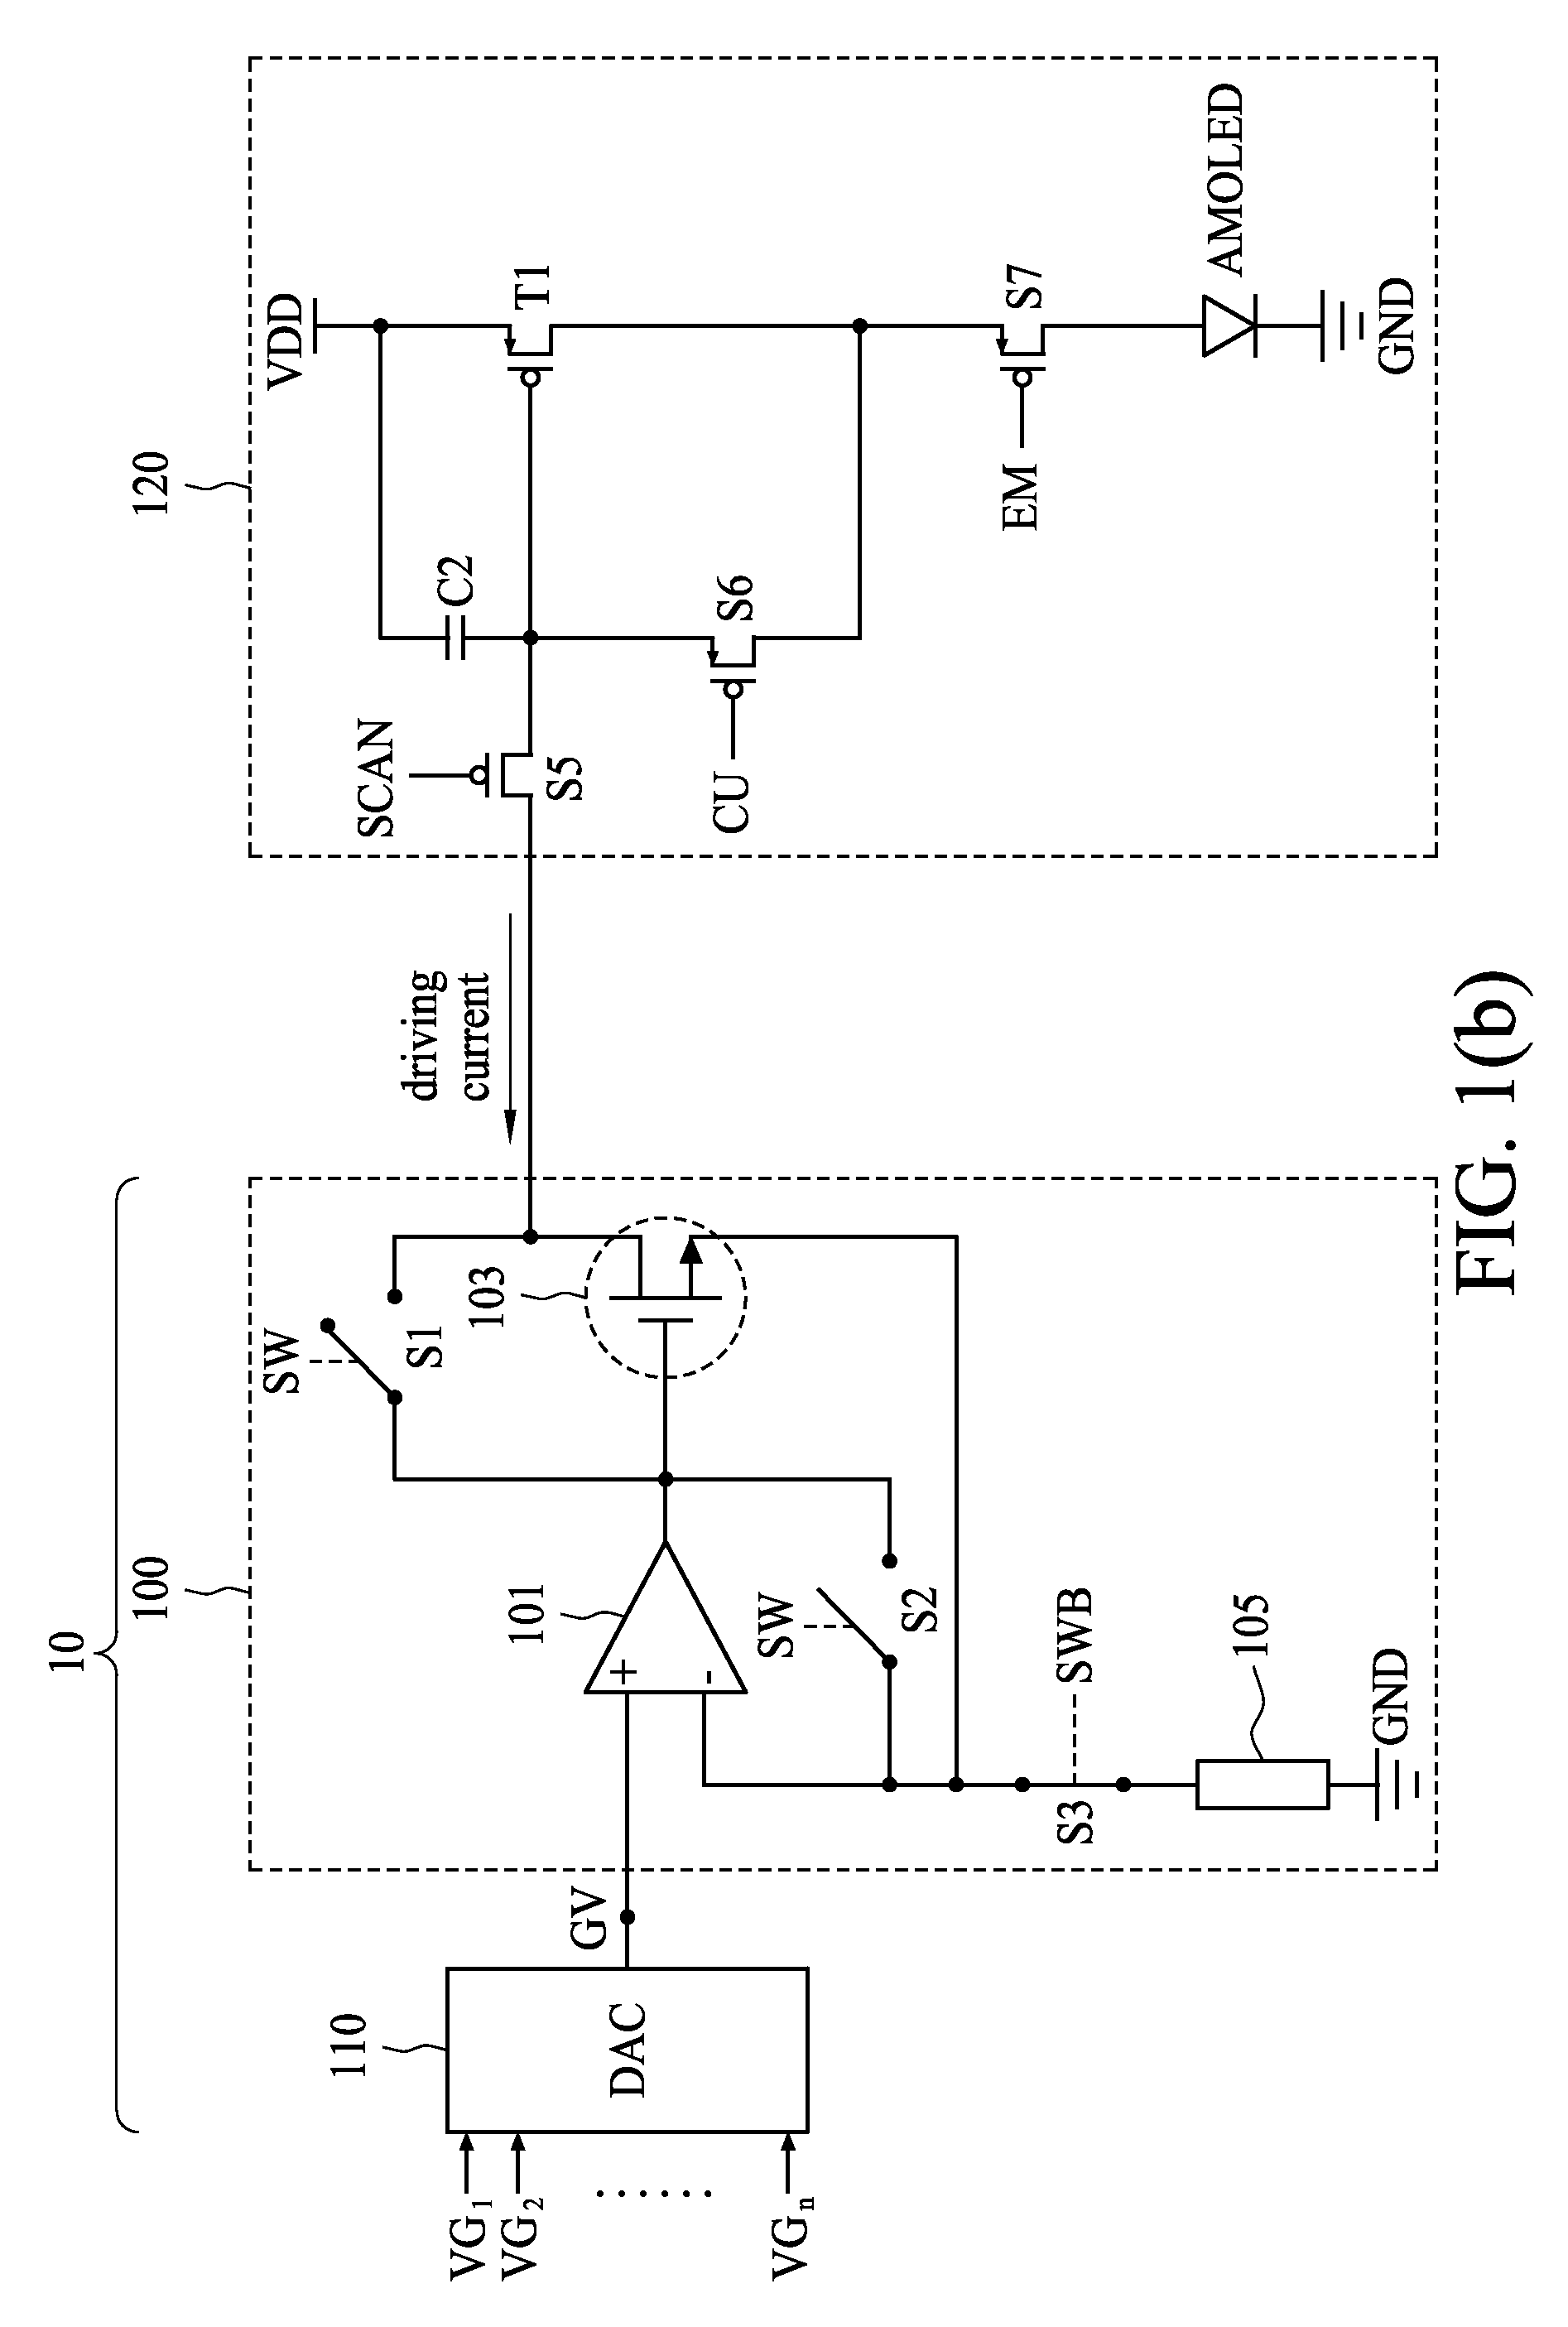 Driver and driver circuit for pixel circuit